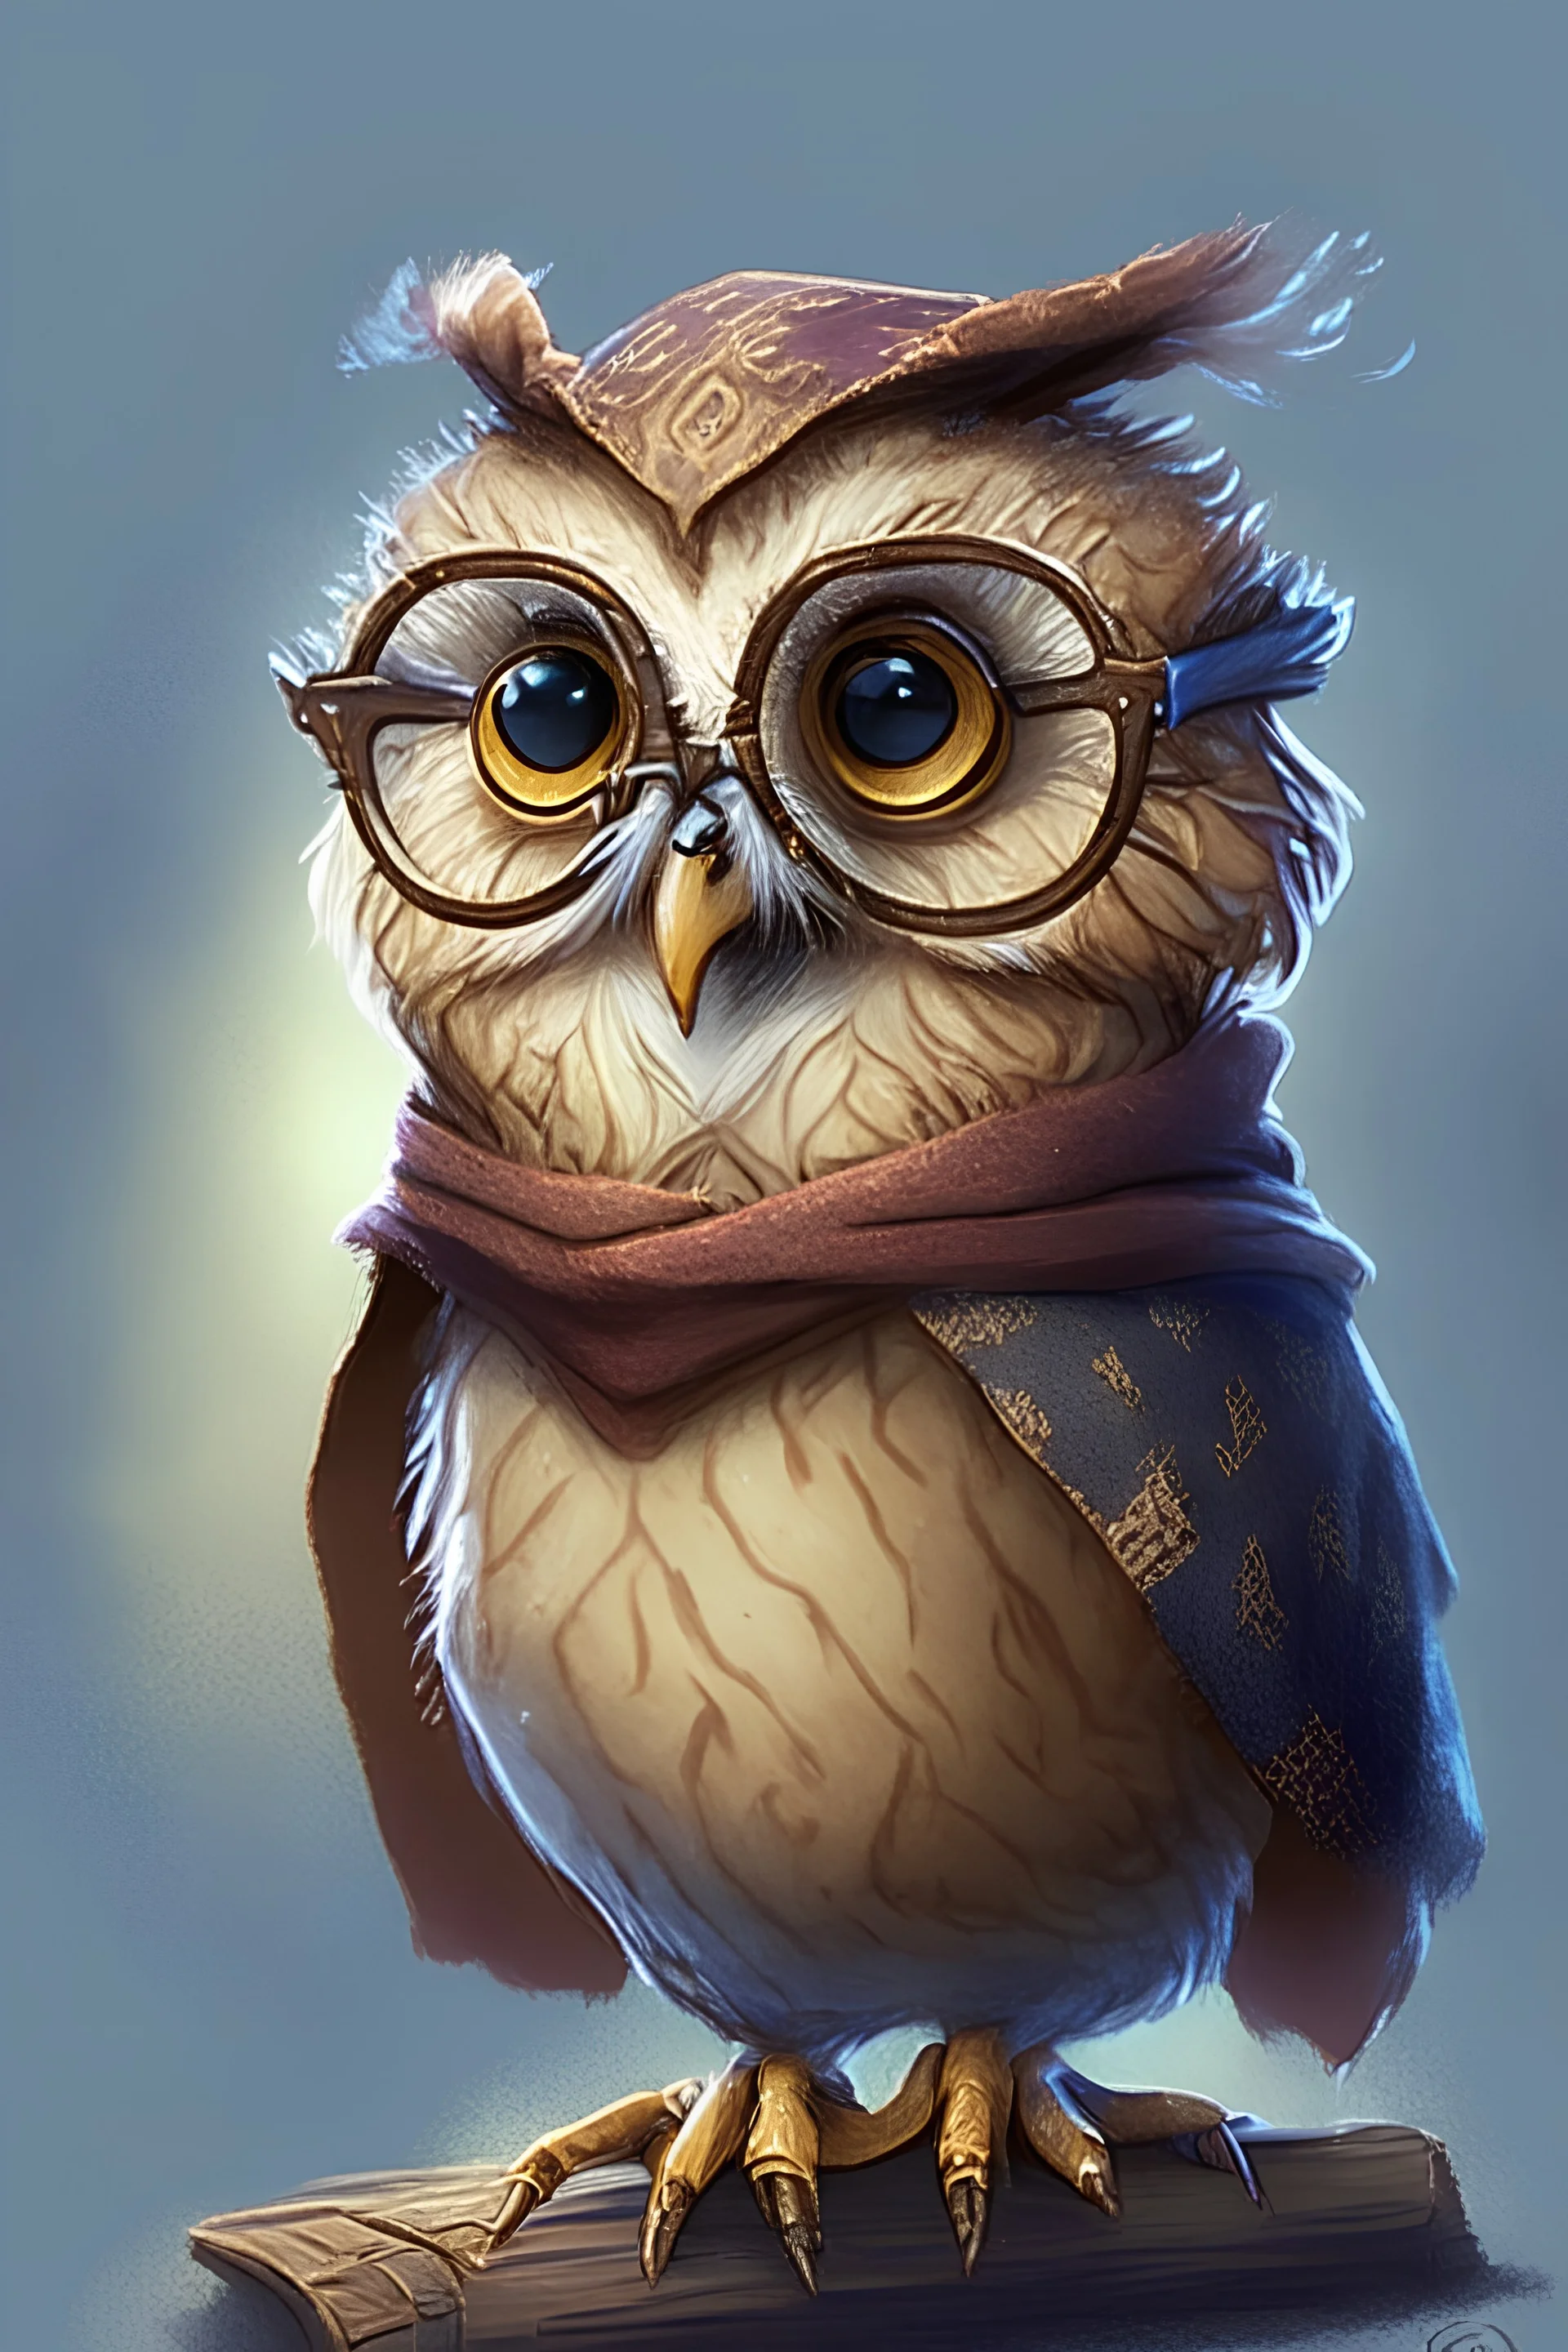 Northern Saw-whet Owlin Wizard from Dungeons and Dragons who is young and shy. Wearing glasses, cute